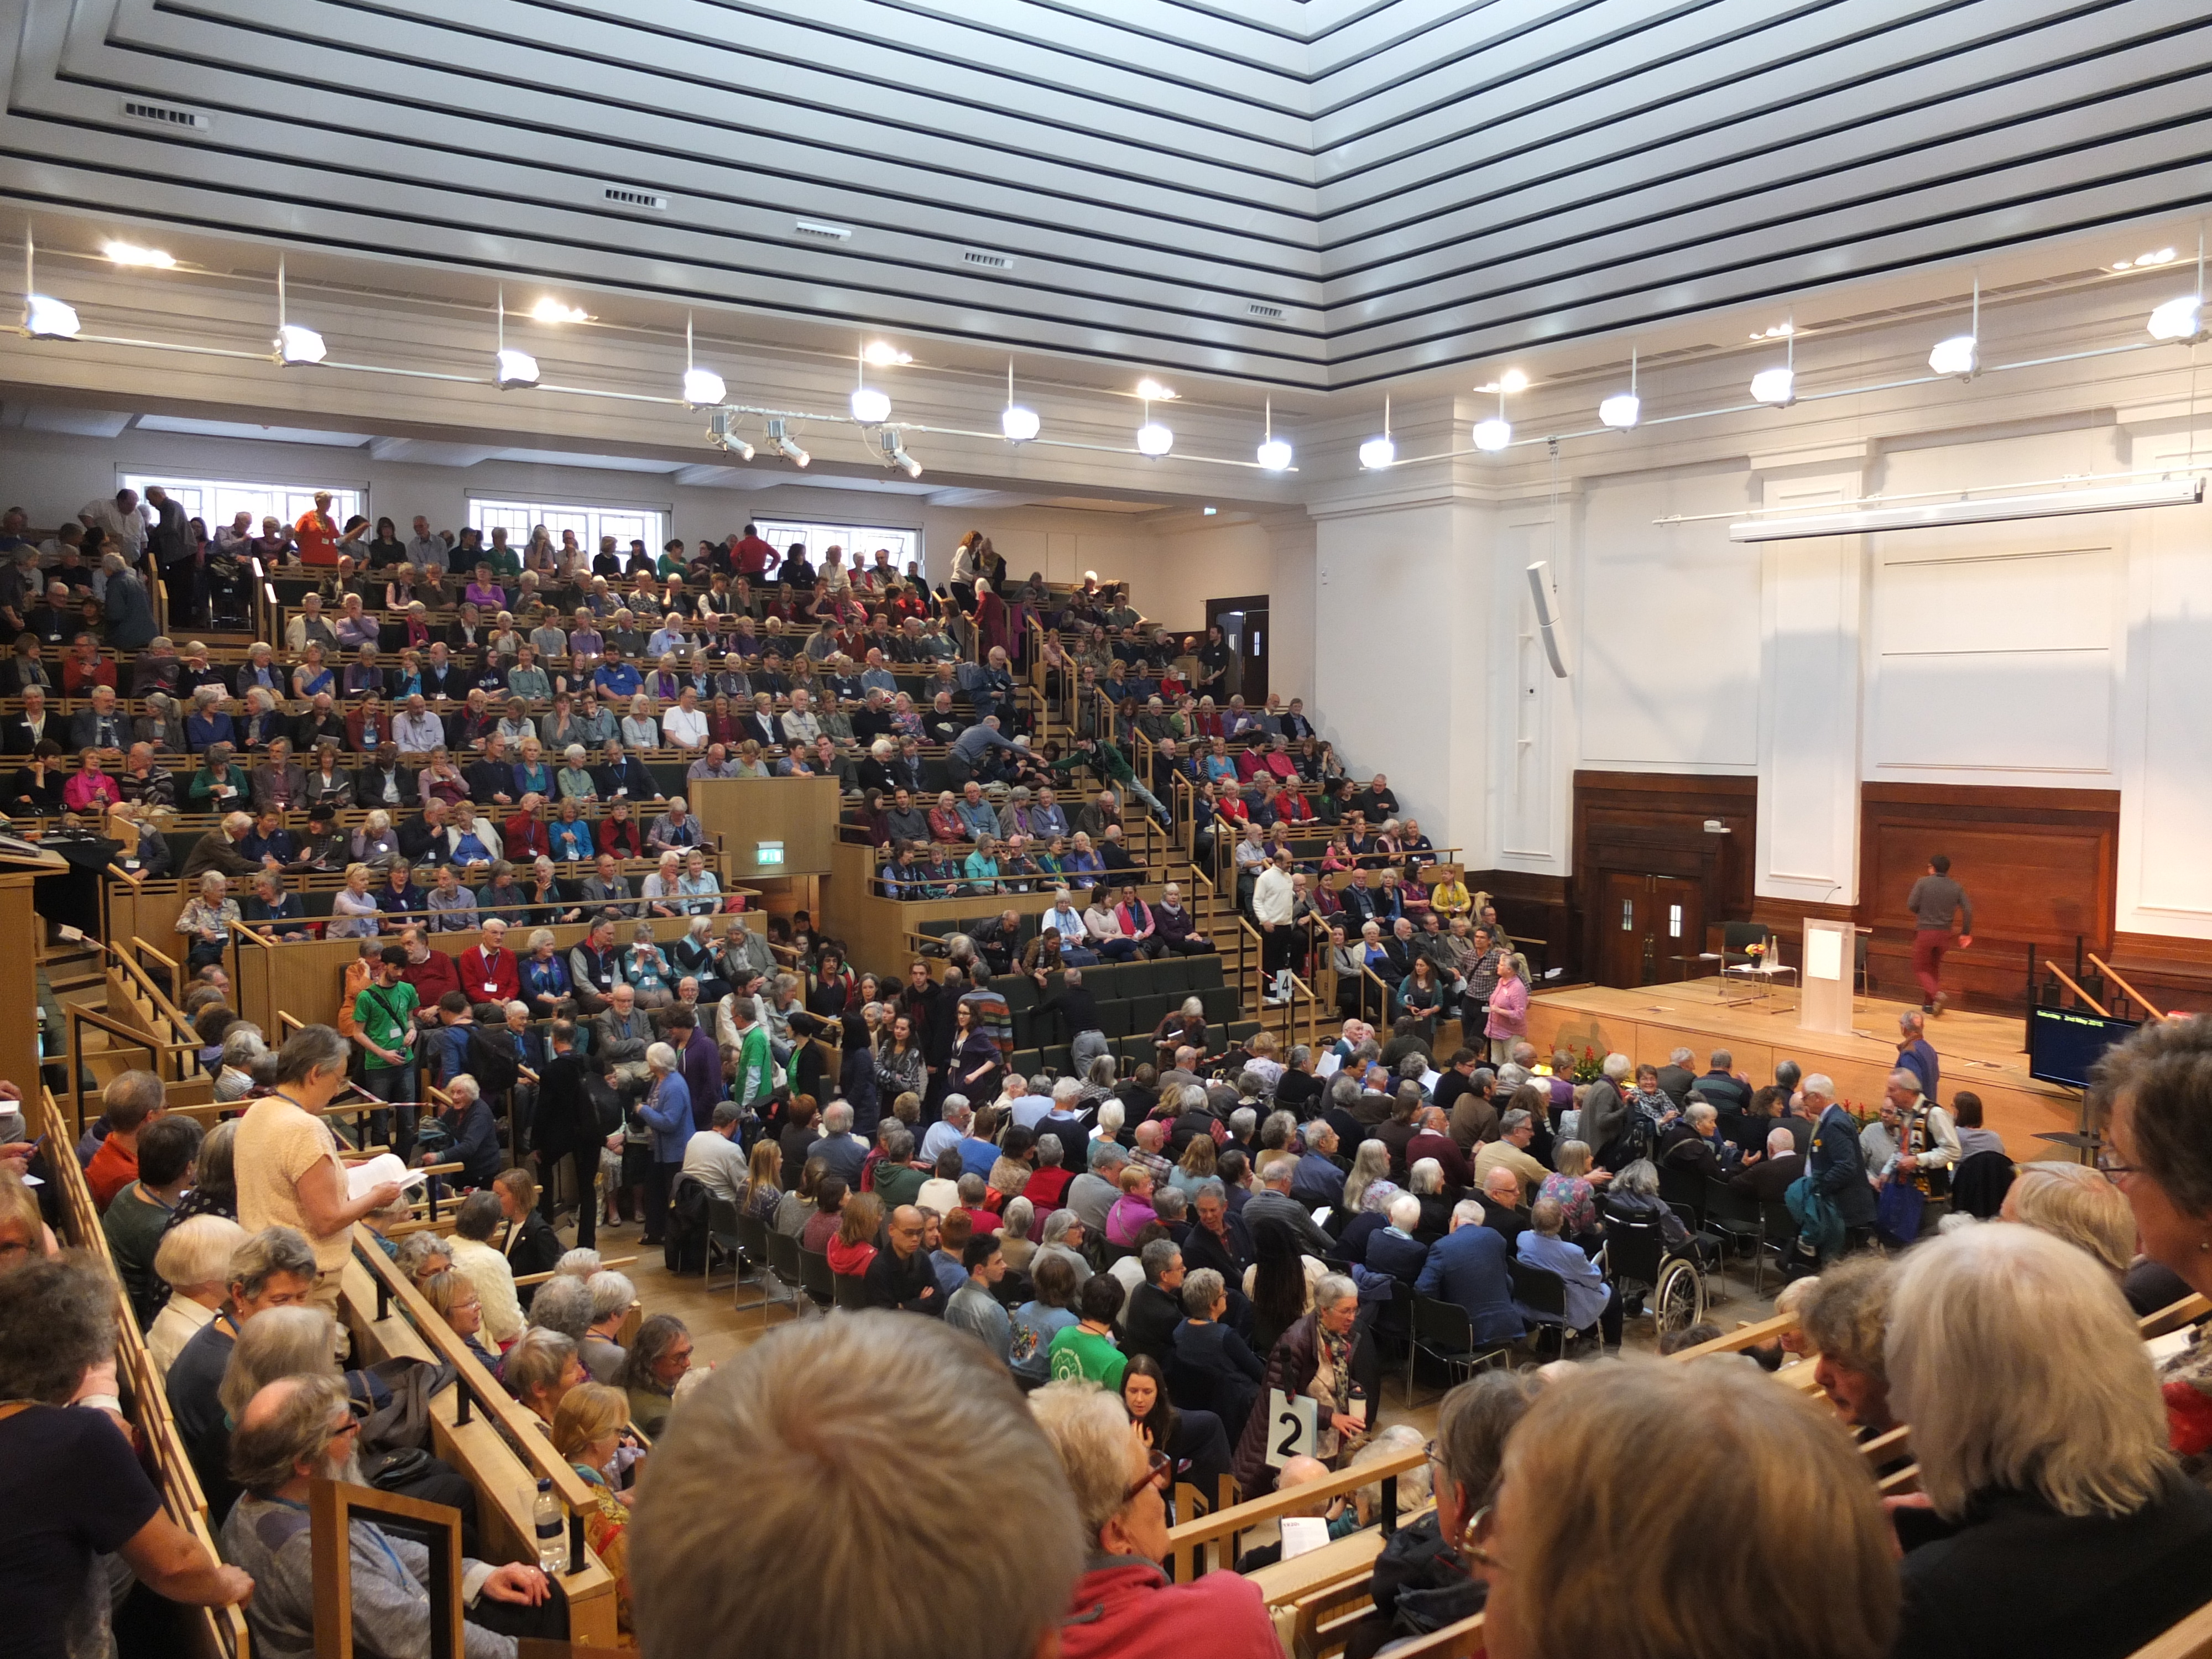 Around 1000 Quakers seated in the tiered large meeting house waiting for the swarthmore lecture to begin